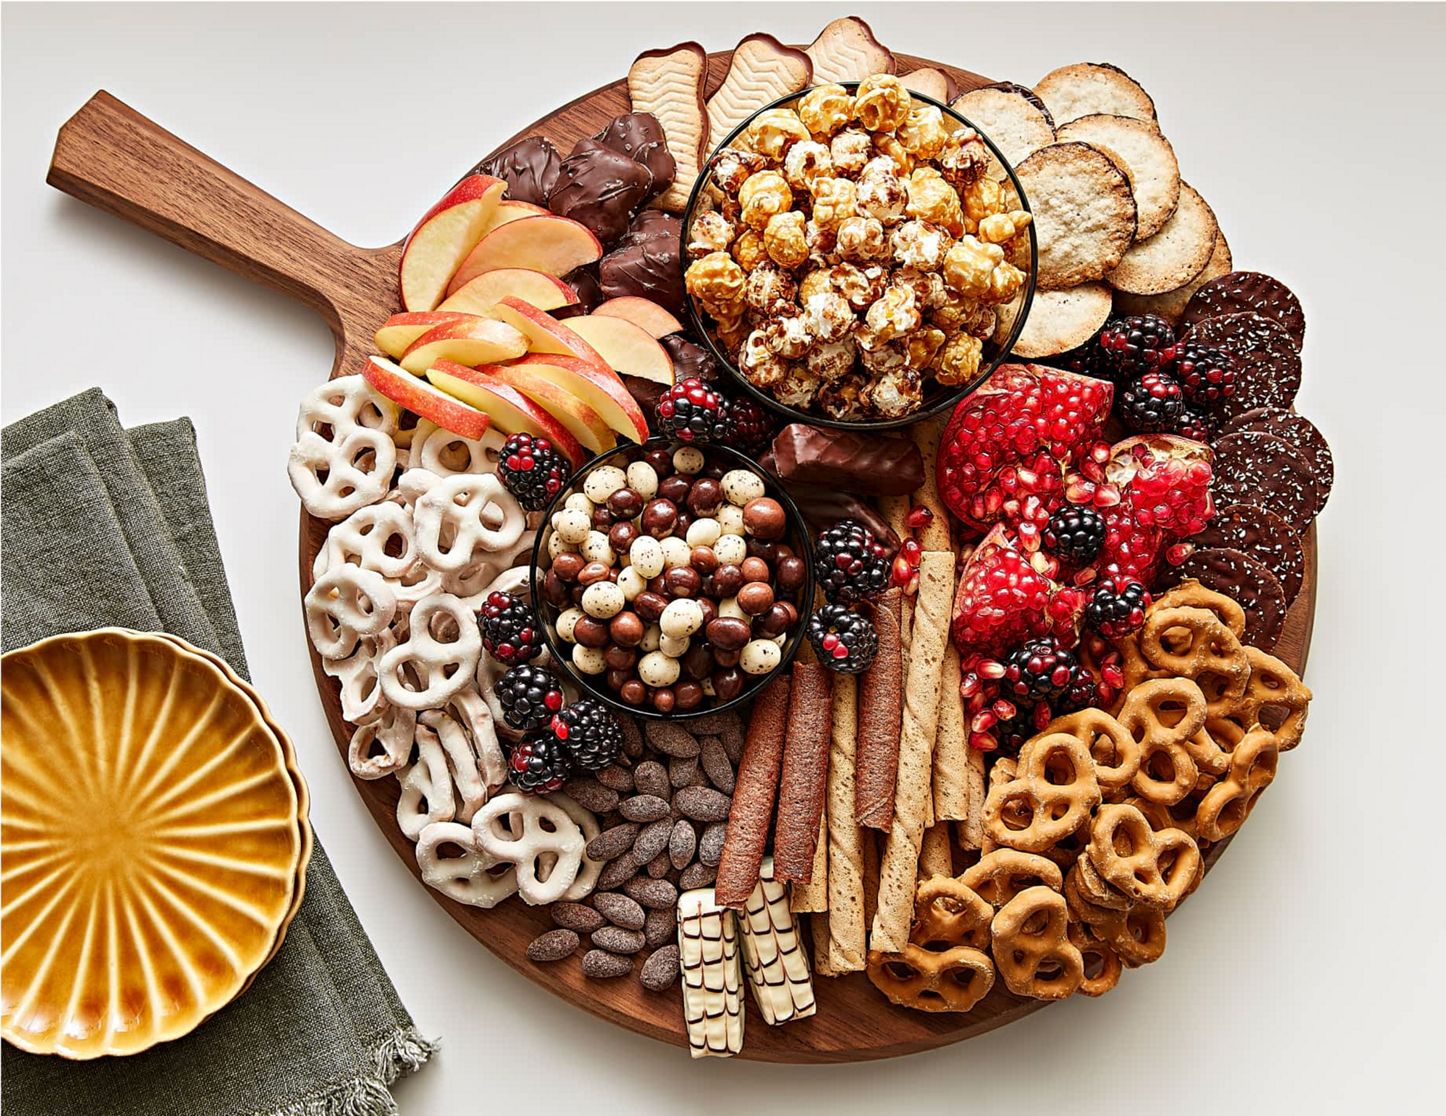 A dessert charcuterie board being filled with different sweets, fruits, nuts and other treats.